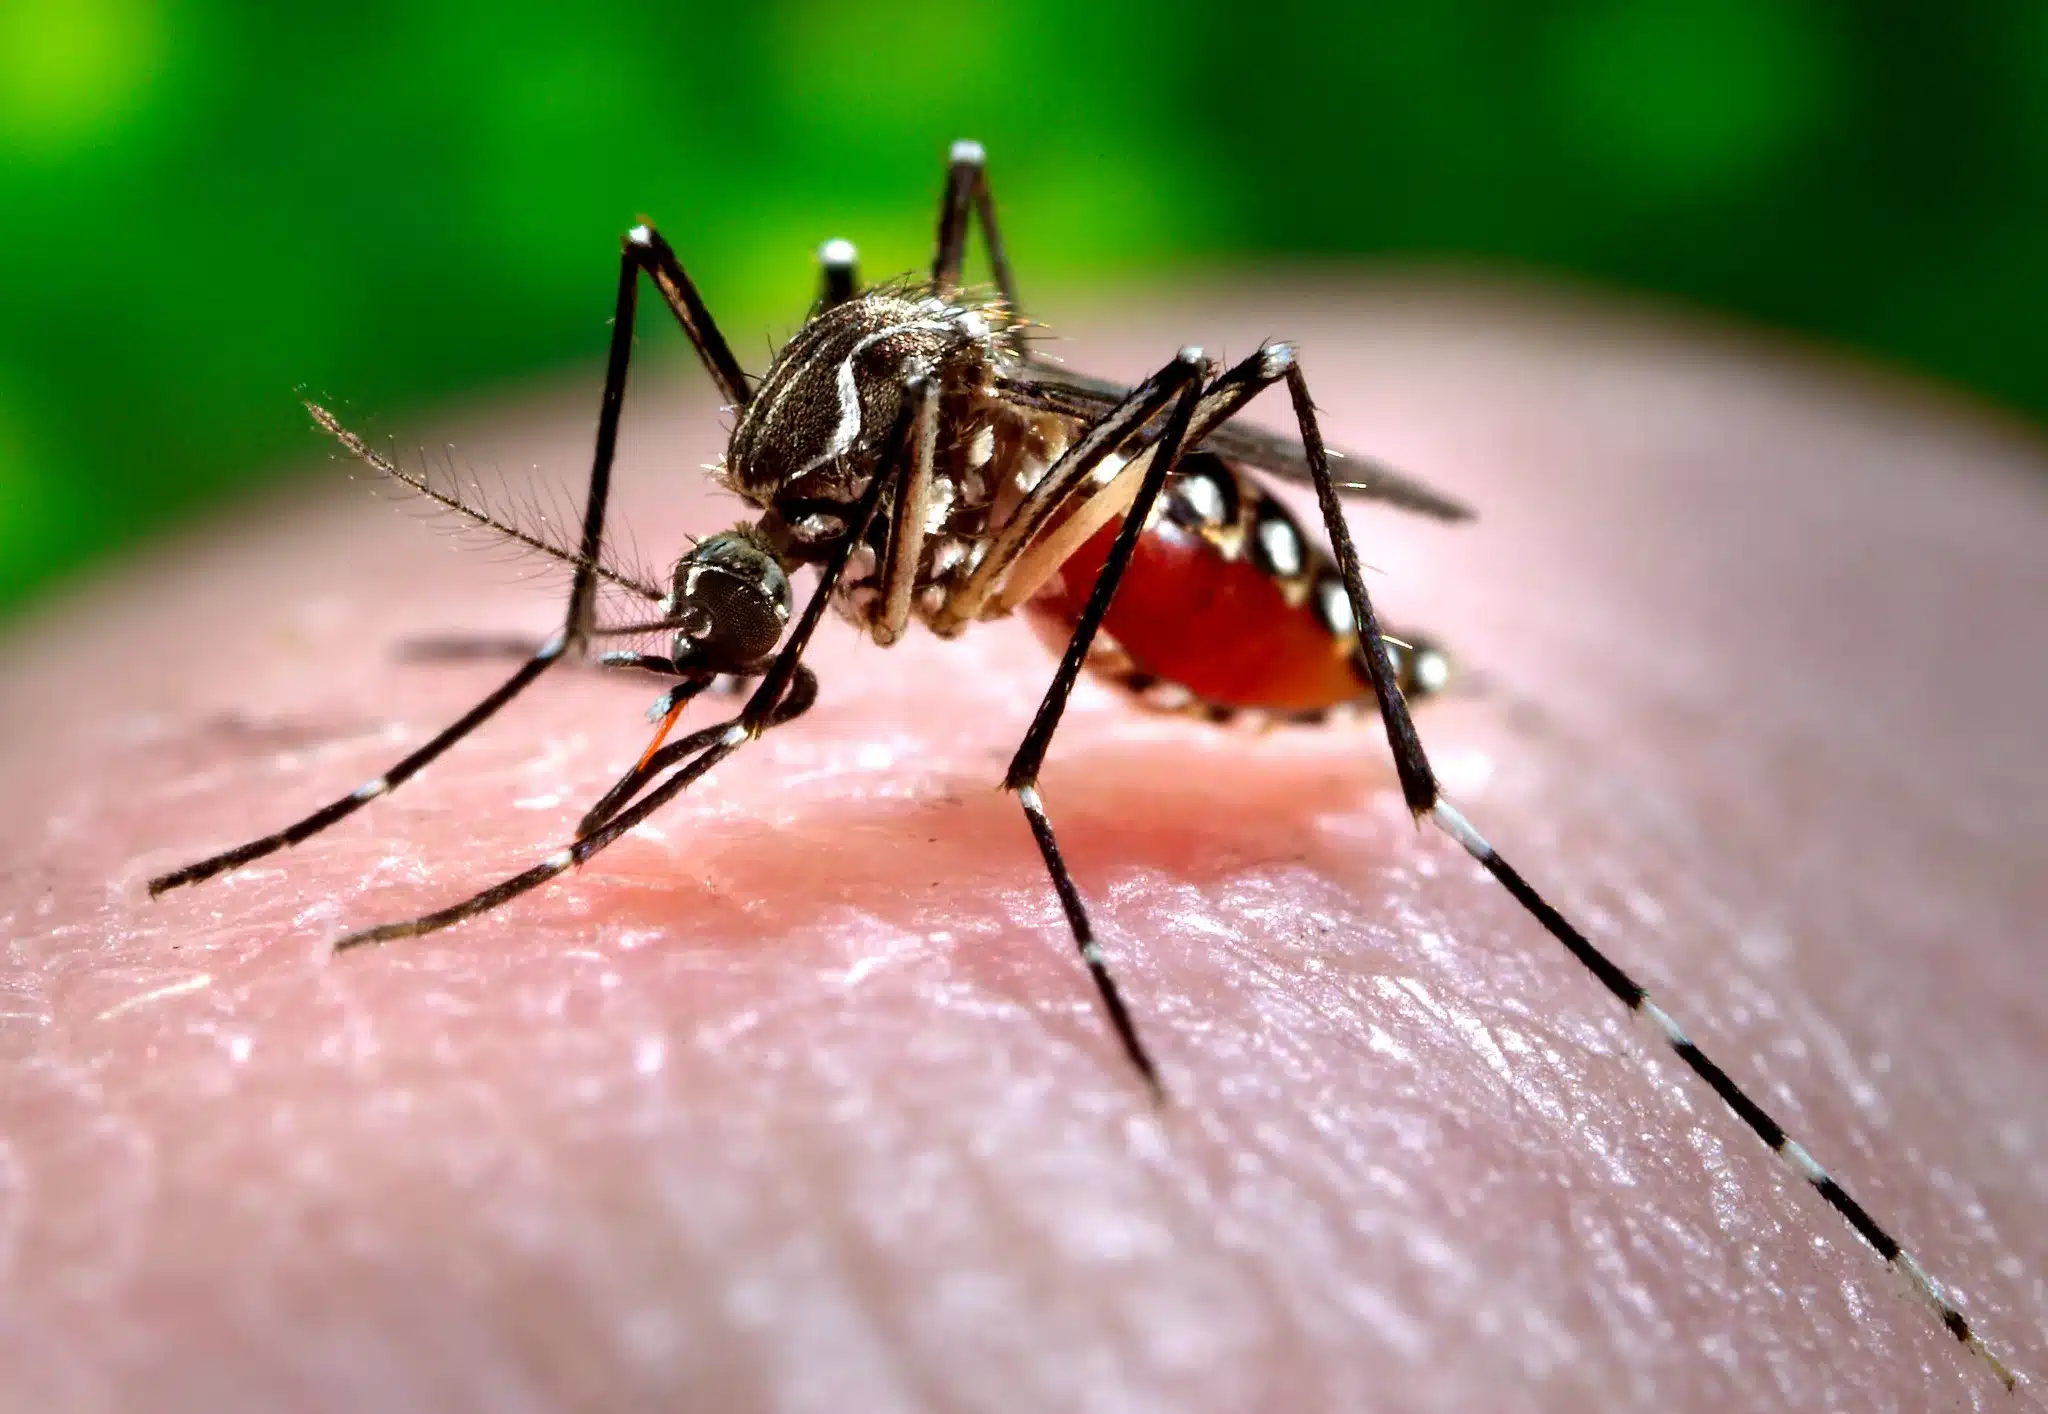 Strength in numbers: How federal agencies are combatting dengue in Puerto Rico